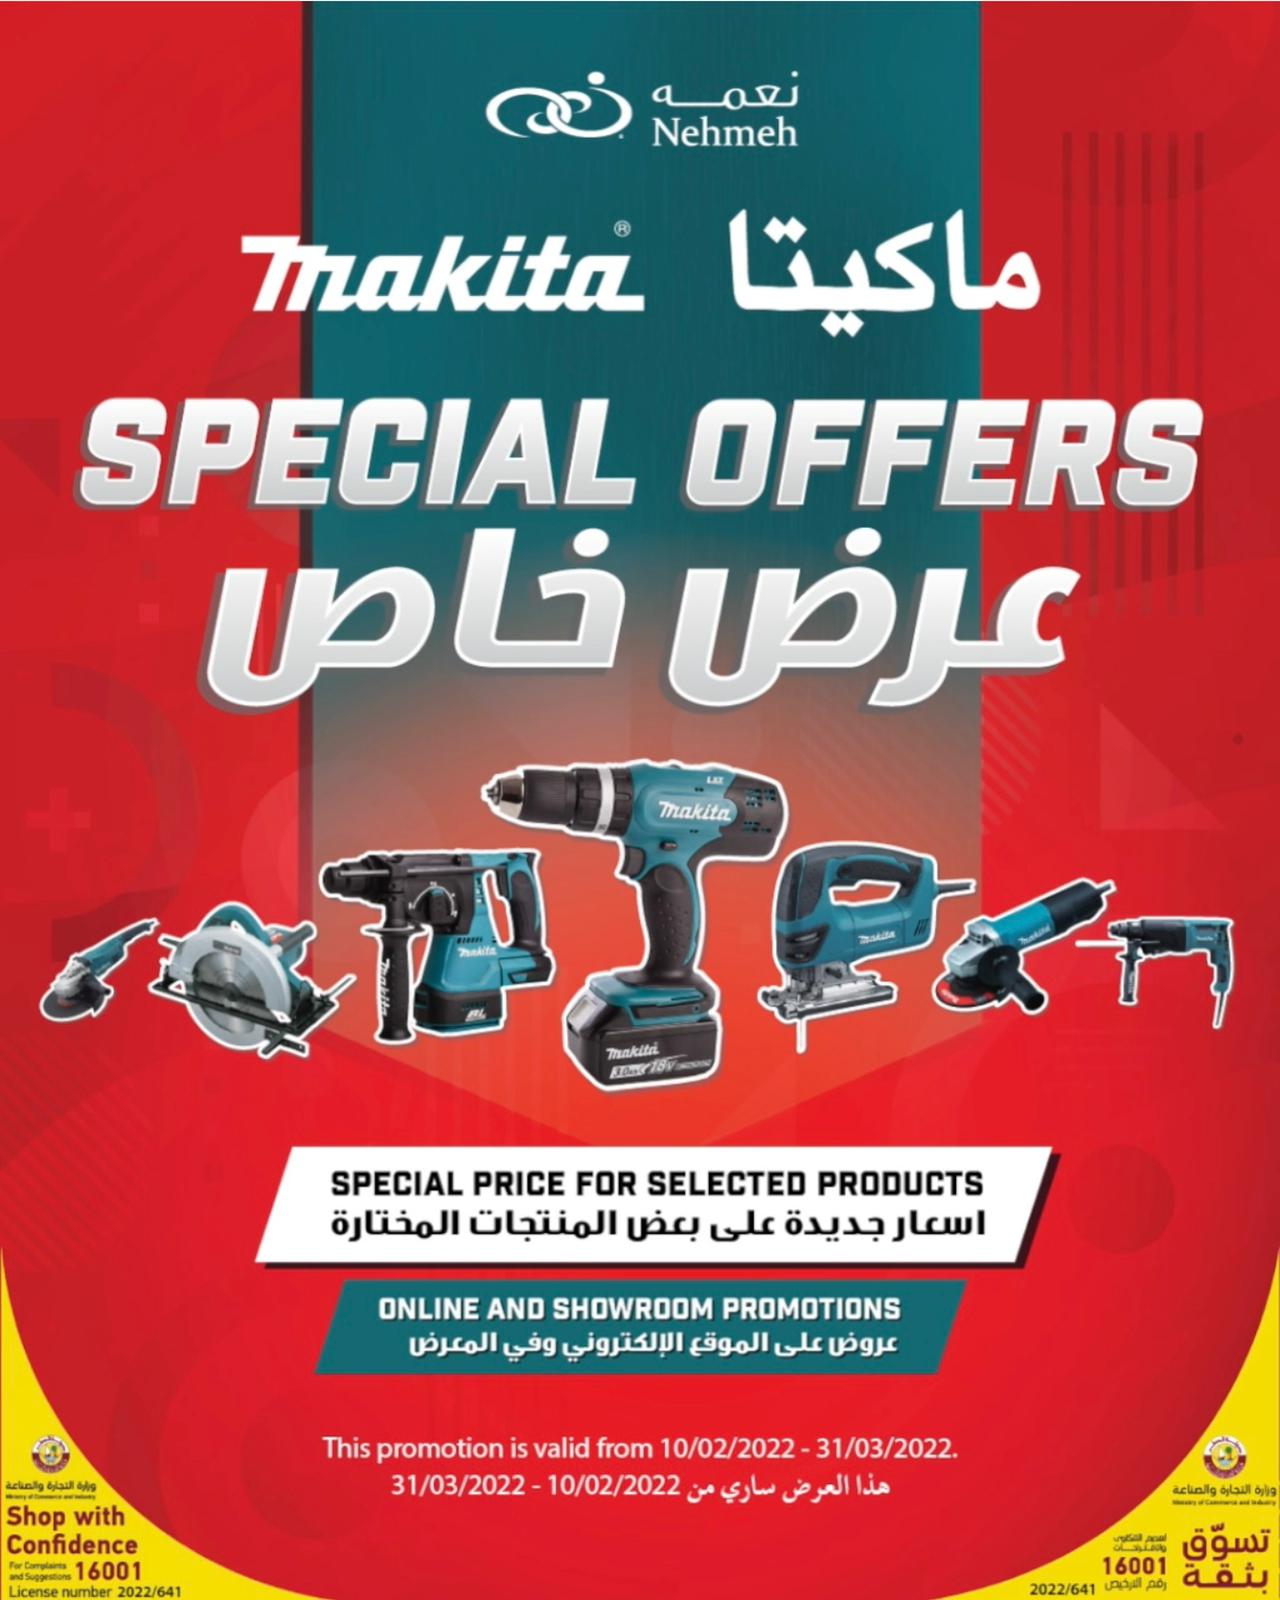 Encommium Thirty Equip Nehmeh on Twitter: "Get up to 50% OFF on our COMBO OFFERS on Makita power  tools for construction, woodworking, automotive, and even DIY. Visit our  showrooms or shop online at https://t.co/LZHuN21hJY to